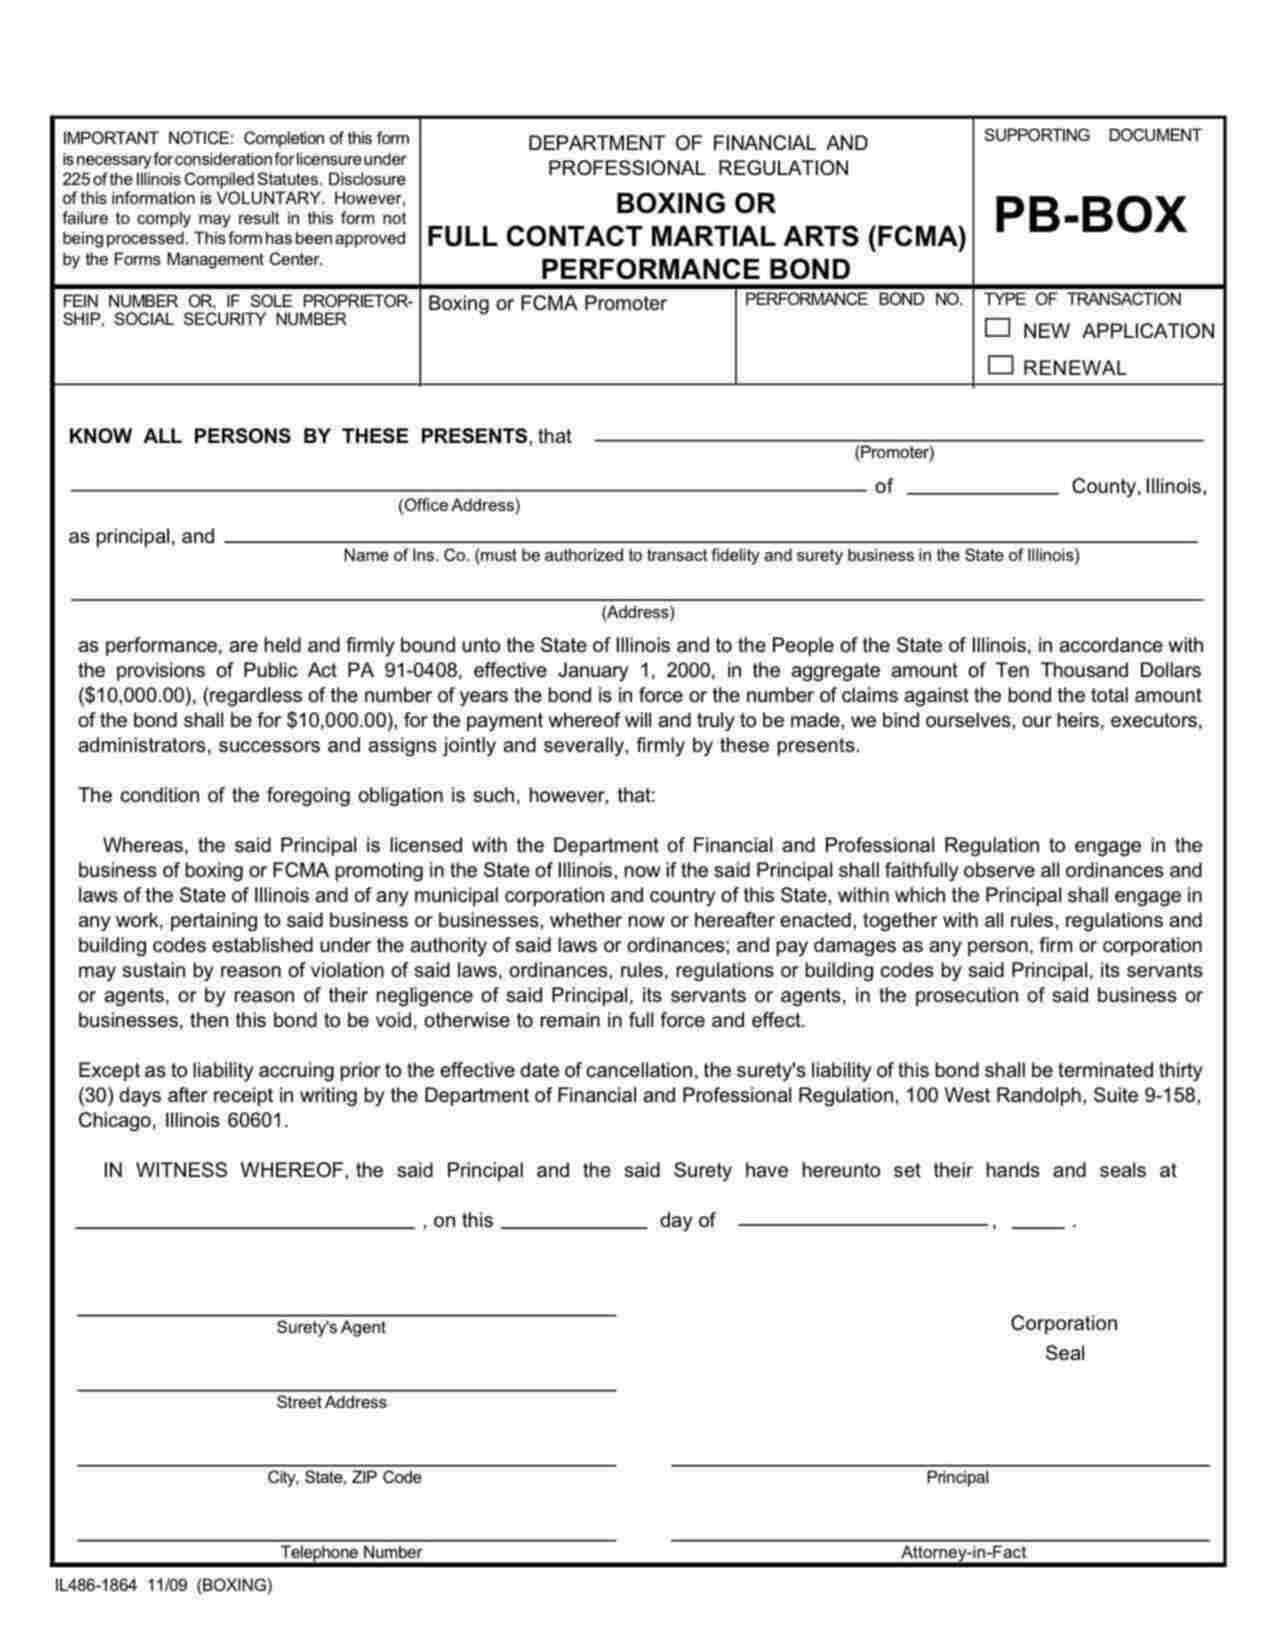 Illinois Boxing or Full Contact Martial Arts (FCMA) Performance Bond Form